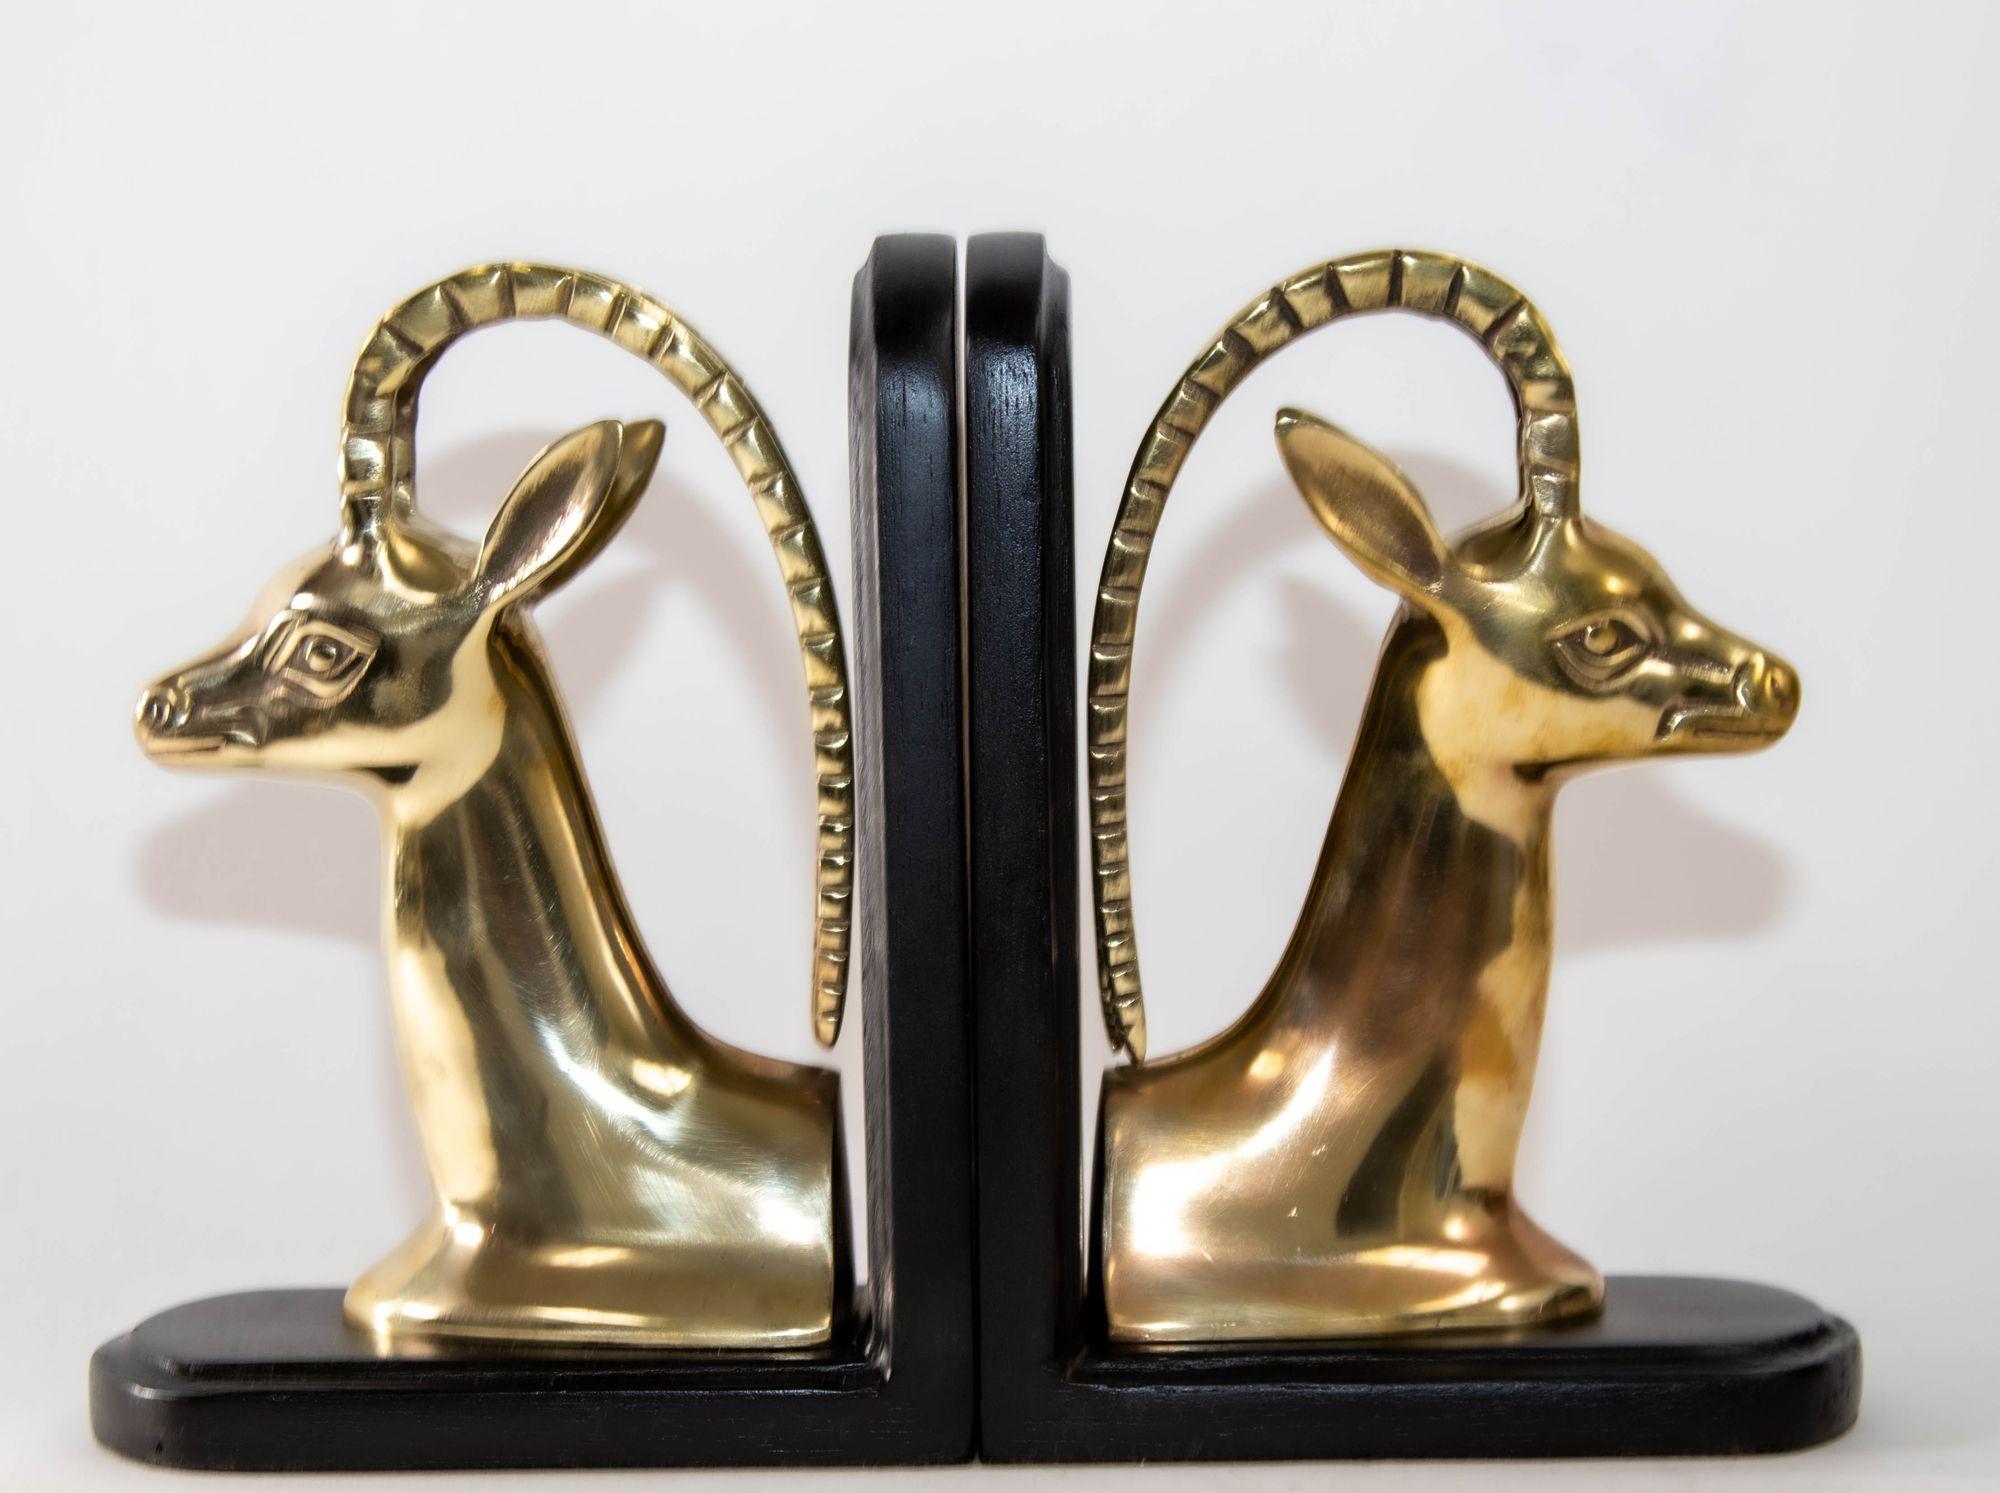 Pair Art Deco Revival Polished Brass Gazelle Mount Bookends.
Exquisite pair of Art Deco Revival antelope gazelle bust sculptures bookends in polished solid brass mounted on black wooden base.
Gazelle Head Hollywood Regency Cast Brass Bookend,